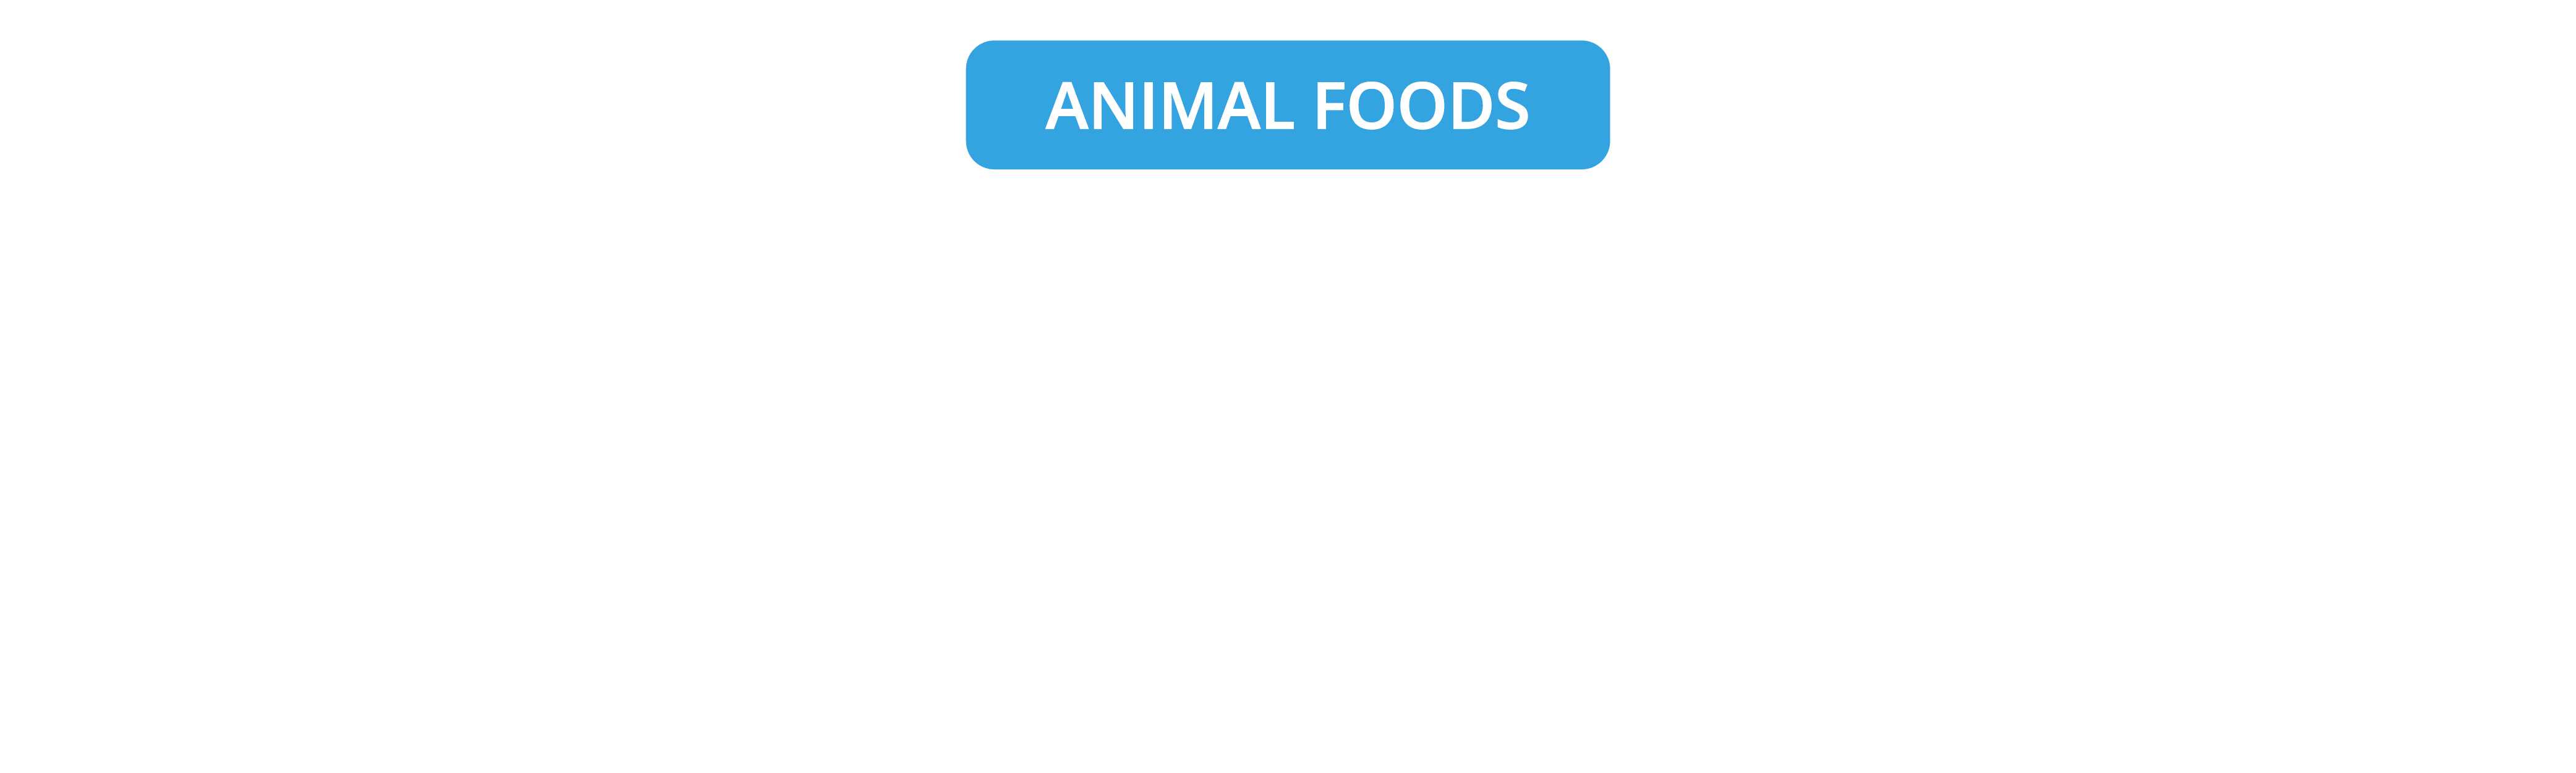 Food obtained from animals — lesson. Science CBSE, Class 6.